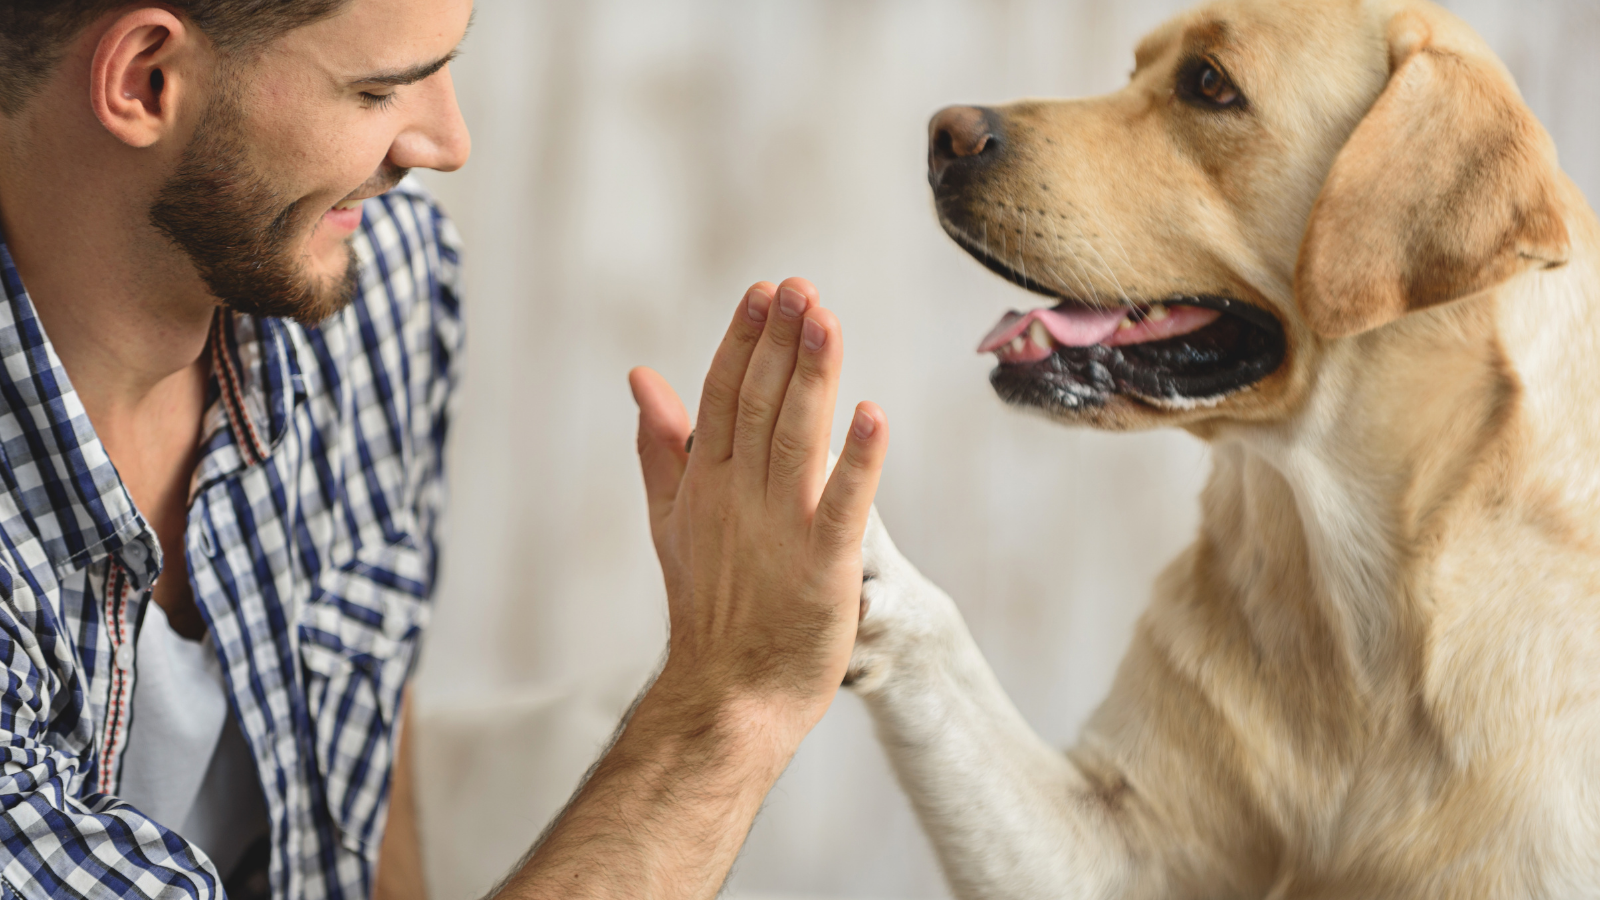 Man and dog giving each other a high five.